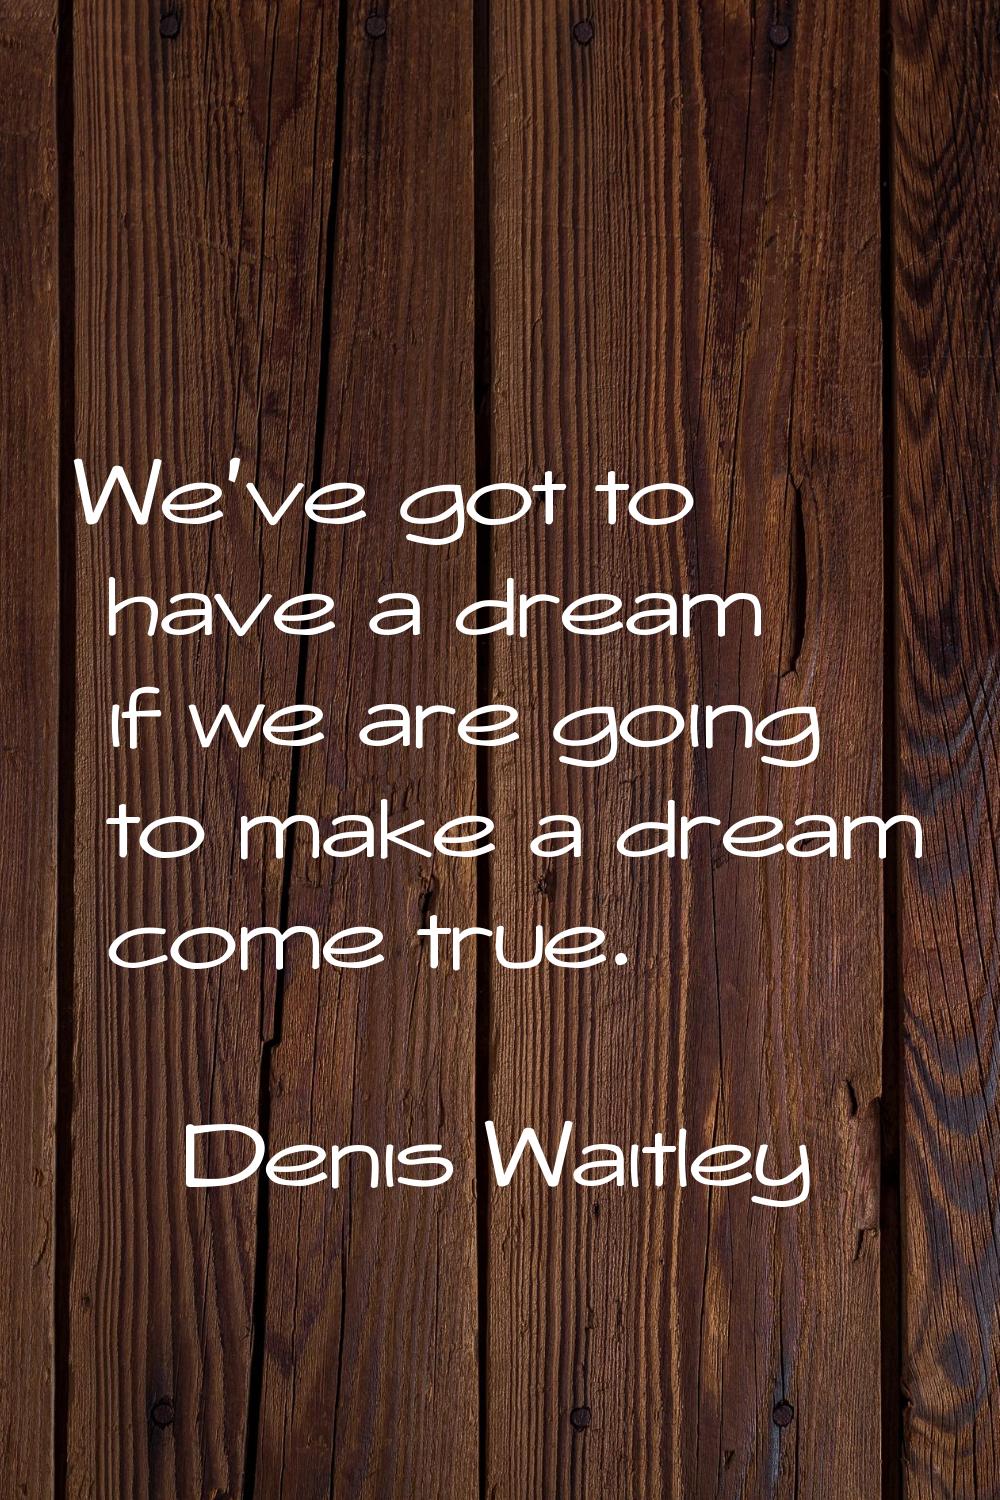 We've got to have a dream if we are going to make a dream come true.